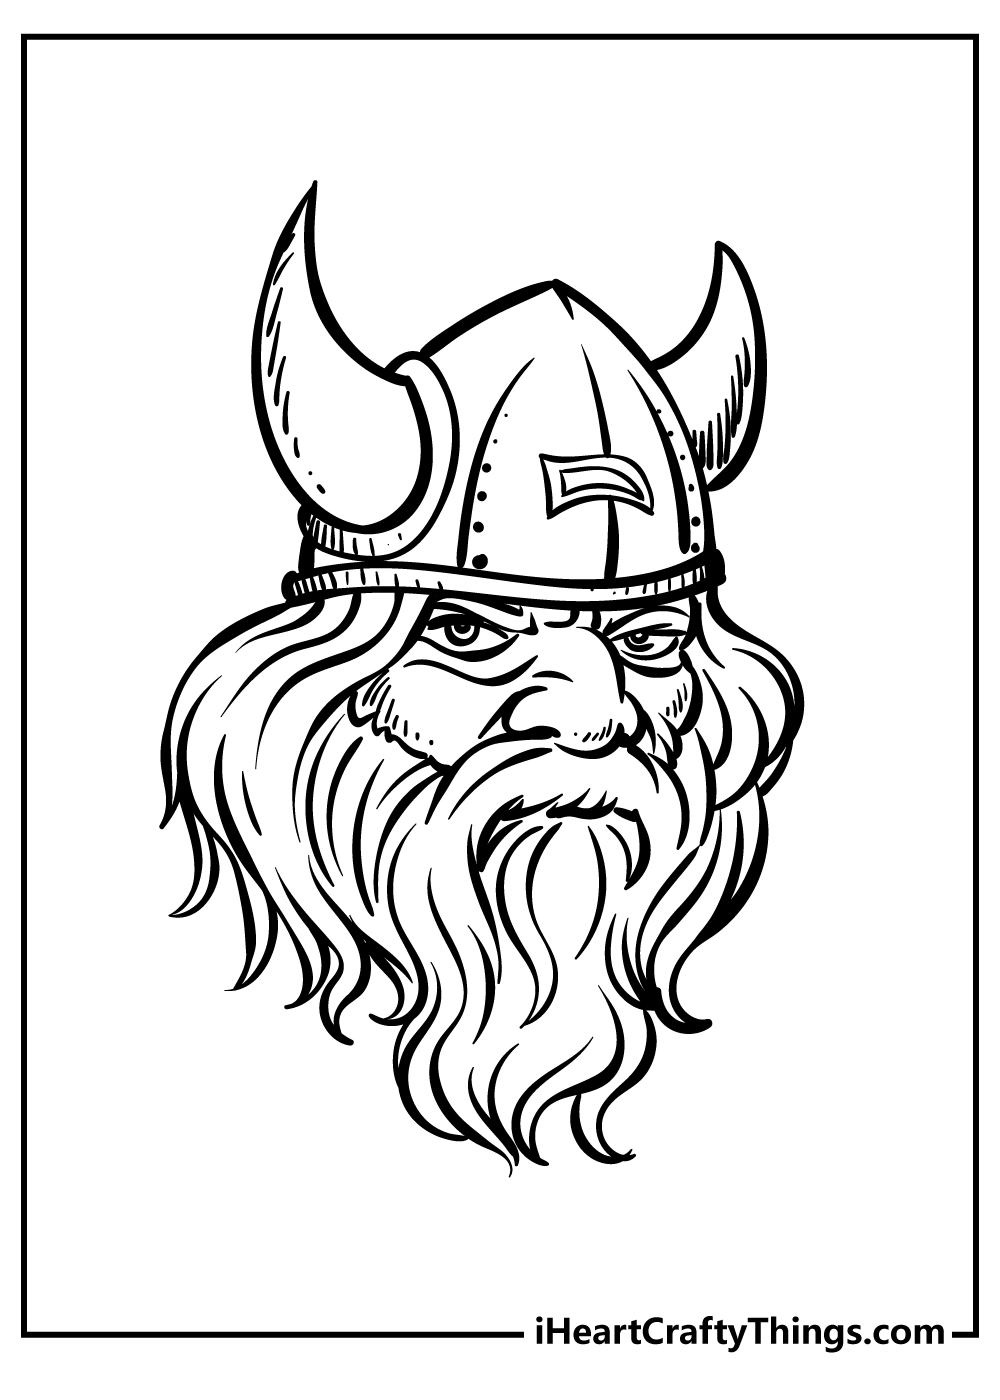 Viking Coloring Book for adults free download